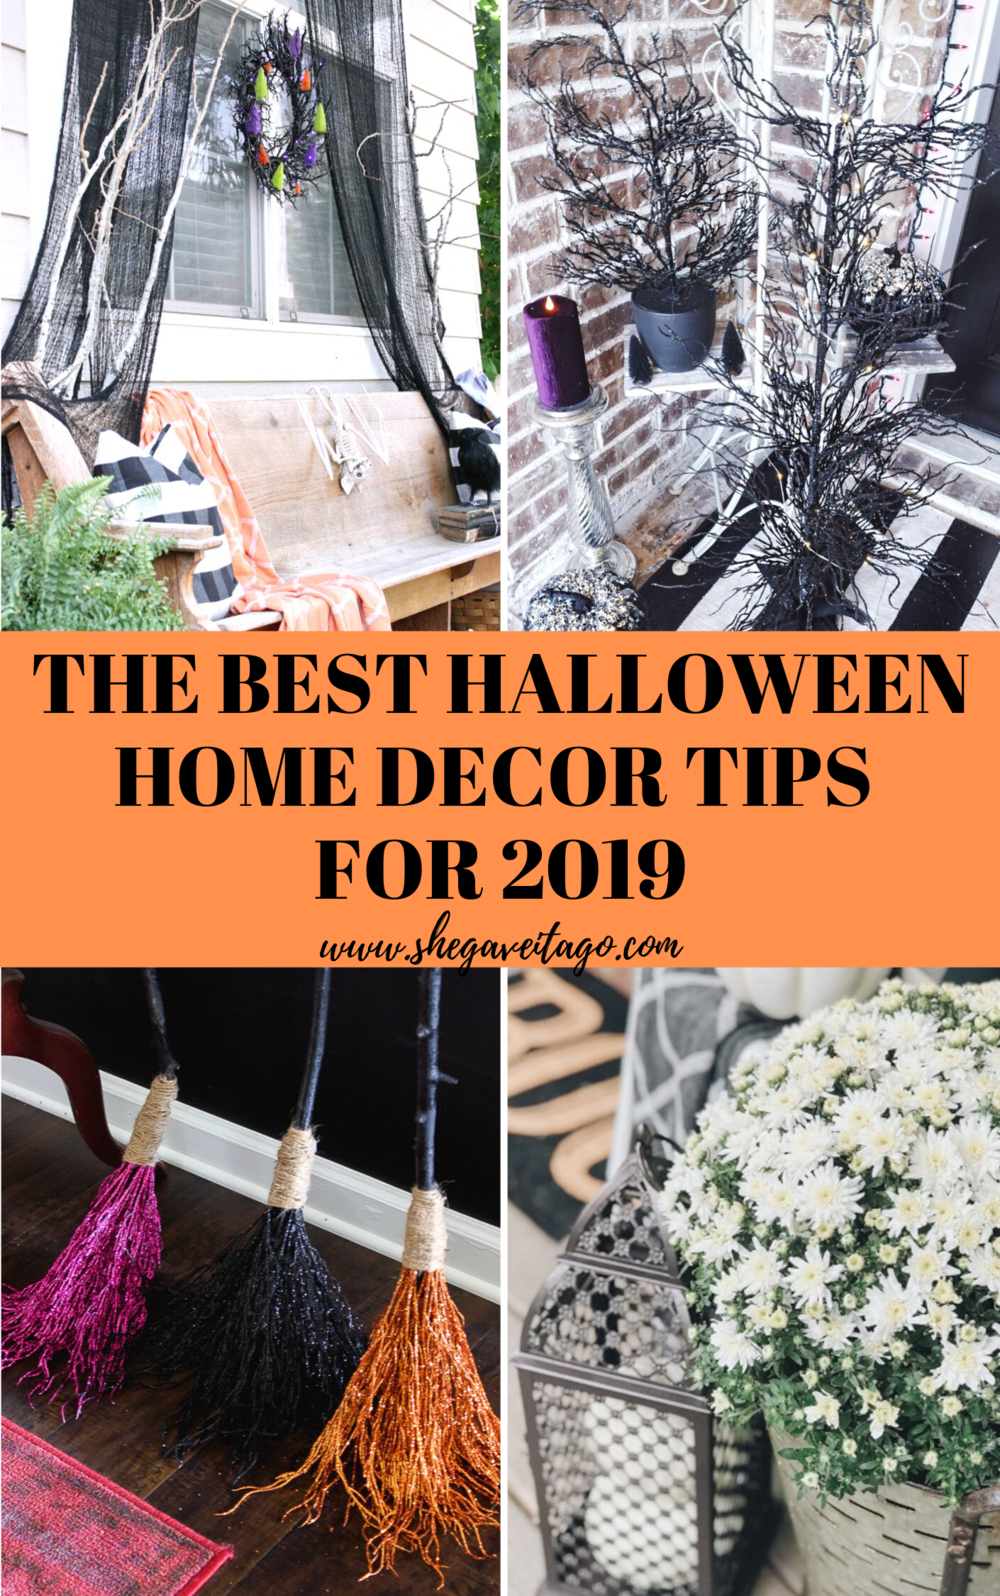 The Best Halloween Home Decor Tips For 2019.png